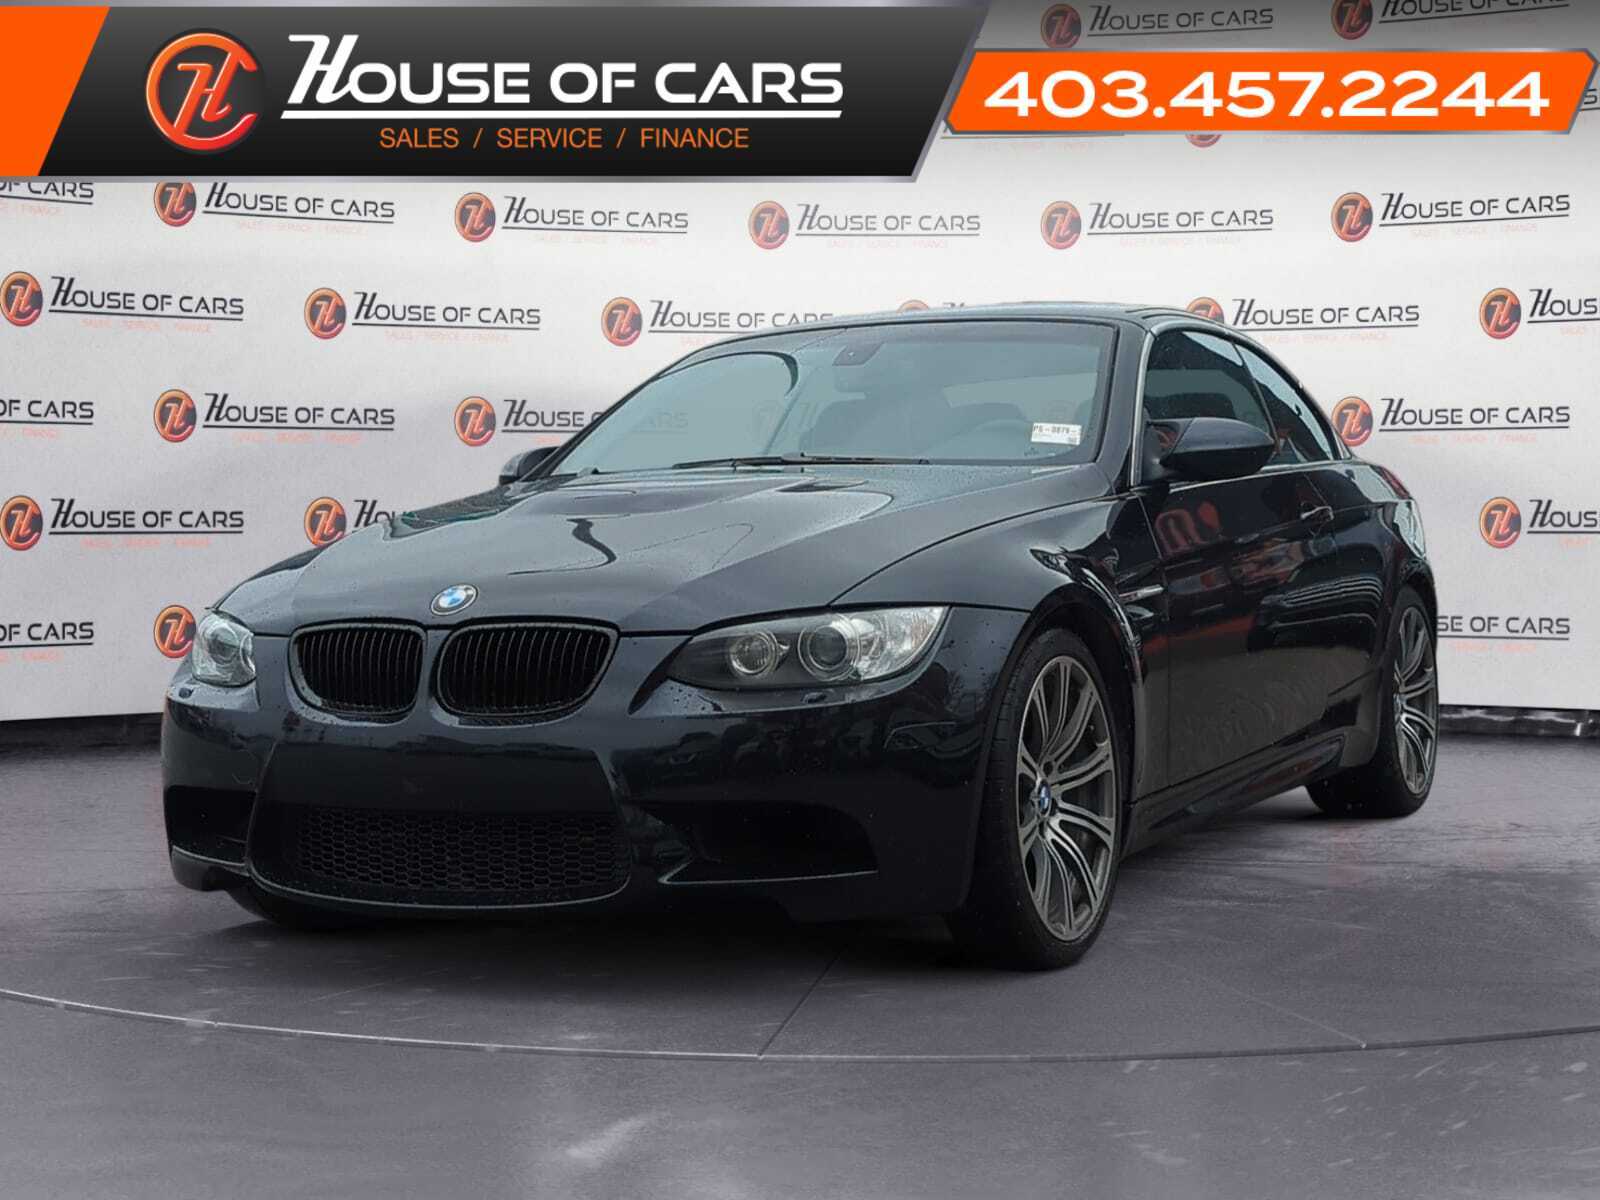 2009 BMW M3 2dr Convertible Cpe Power Windows Leather Seats 